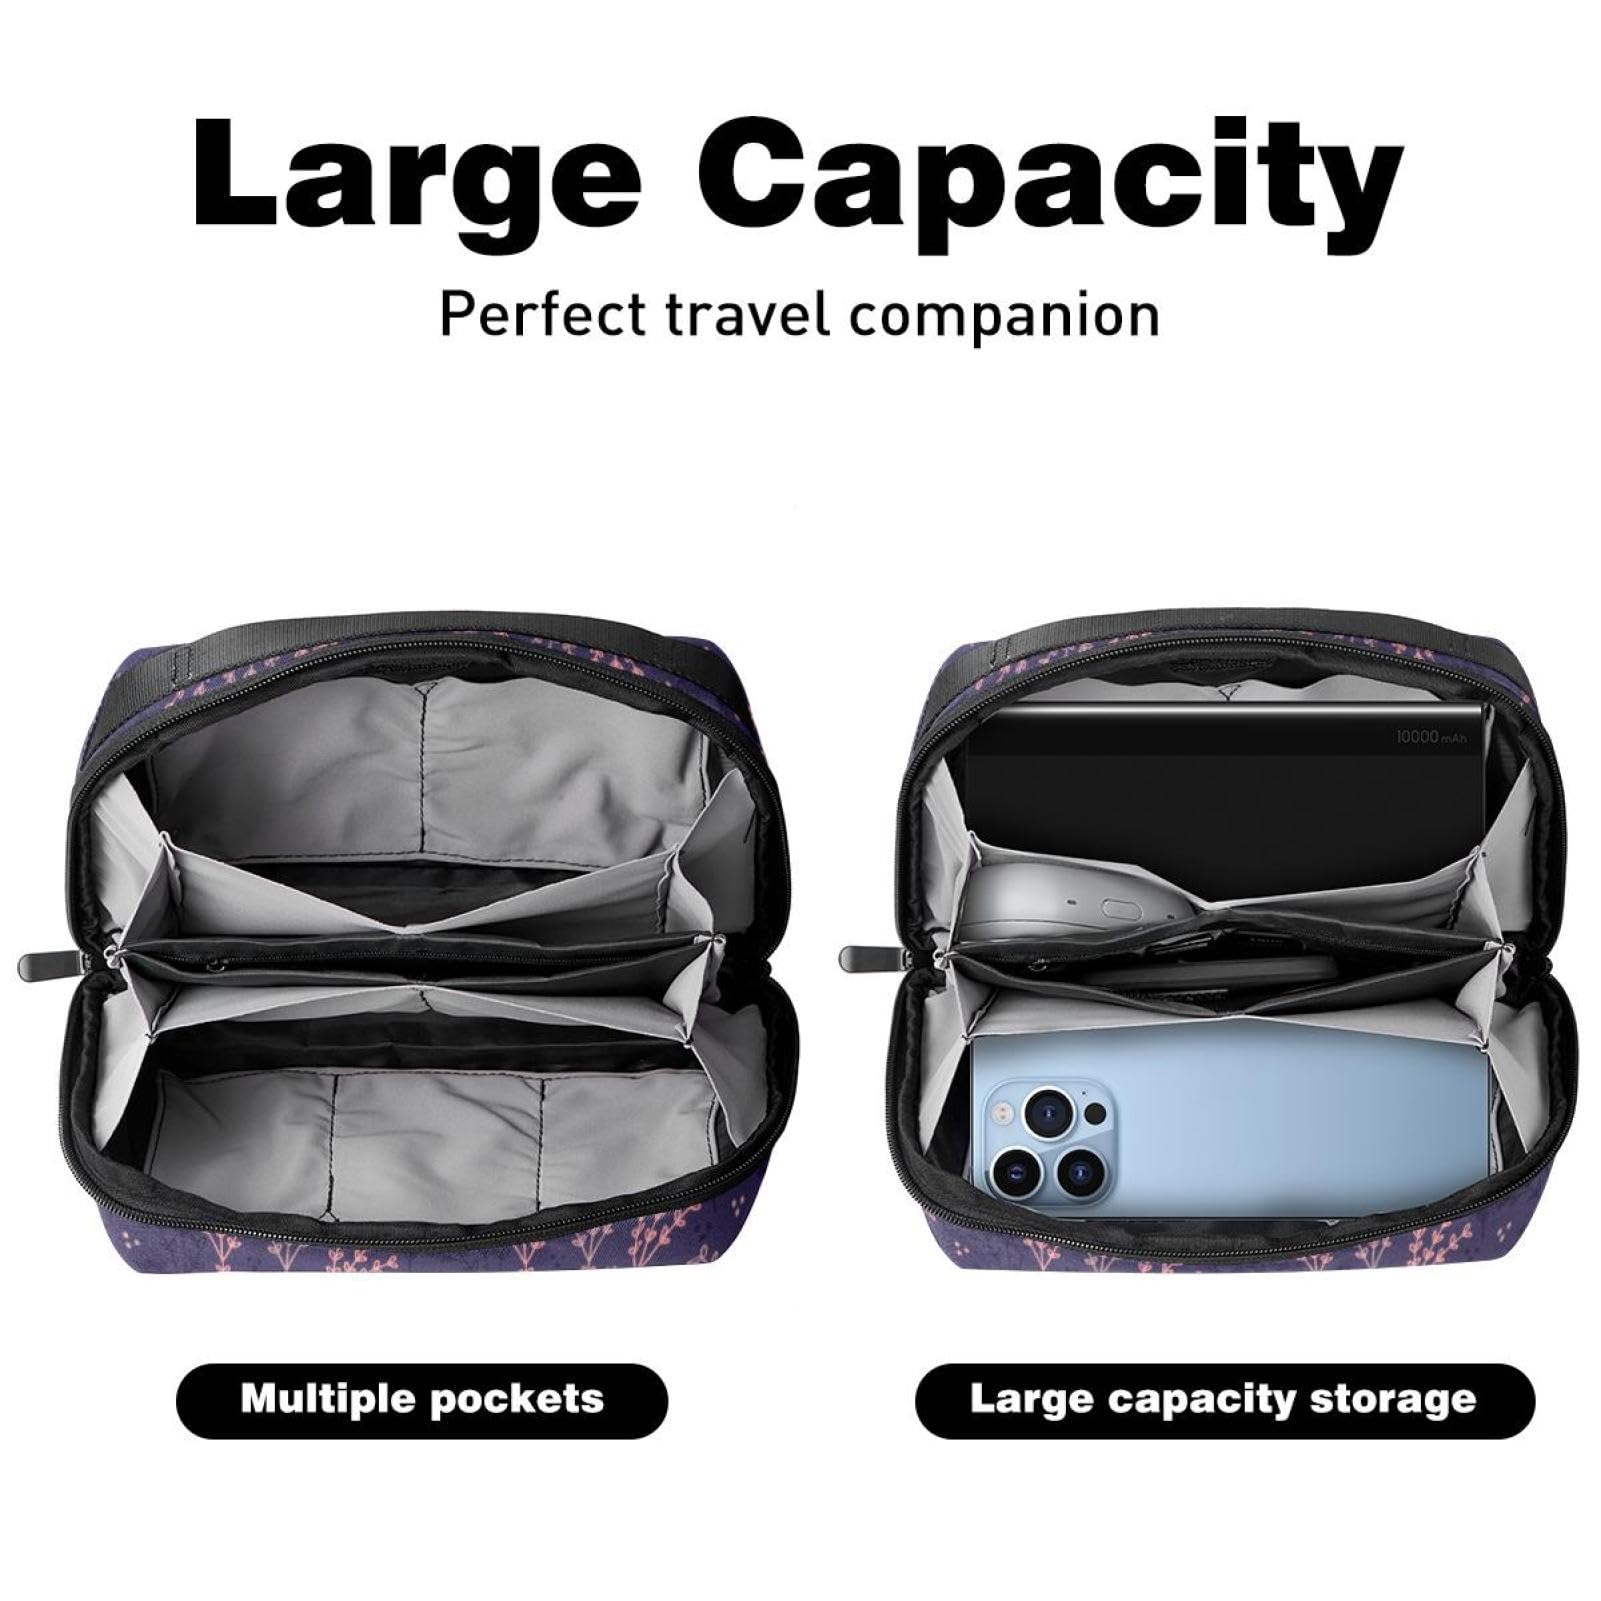 Purple Electronics Organizer, Cord Cable Storage Bag Waterproof for Home Travelling, Electronic Accessories Case for Charge Mouse USB SD Card Hard Drives